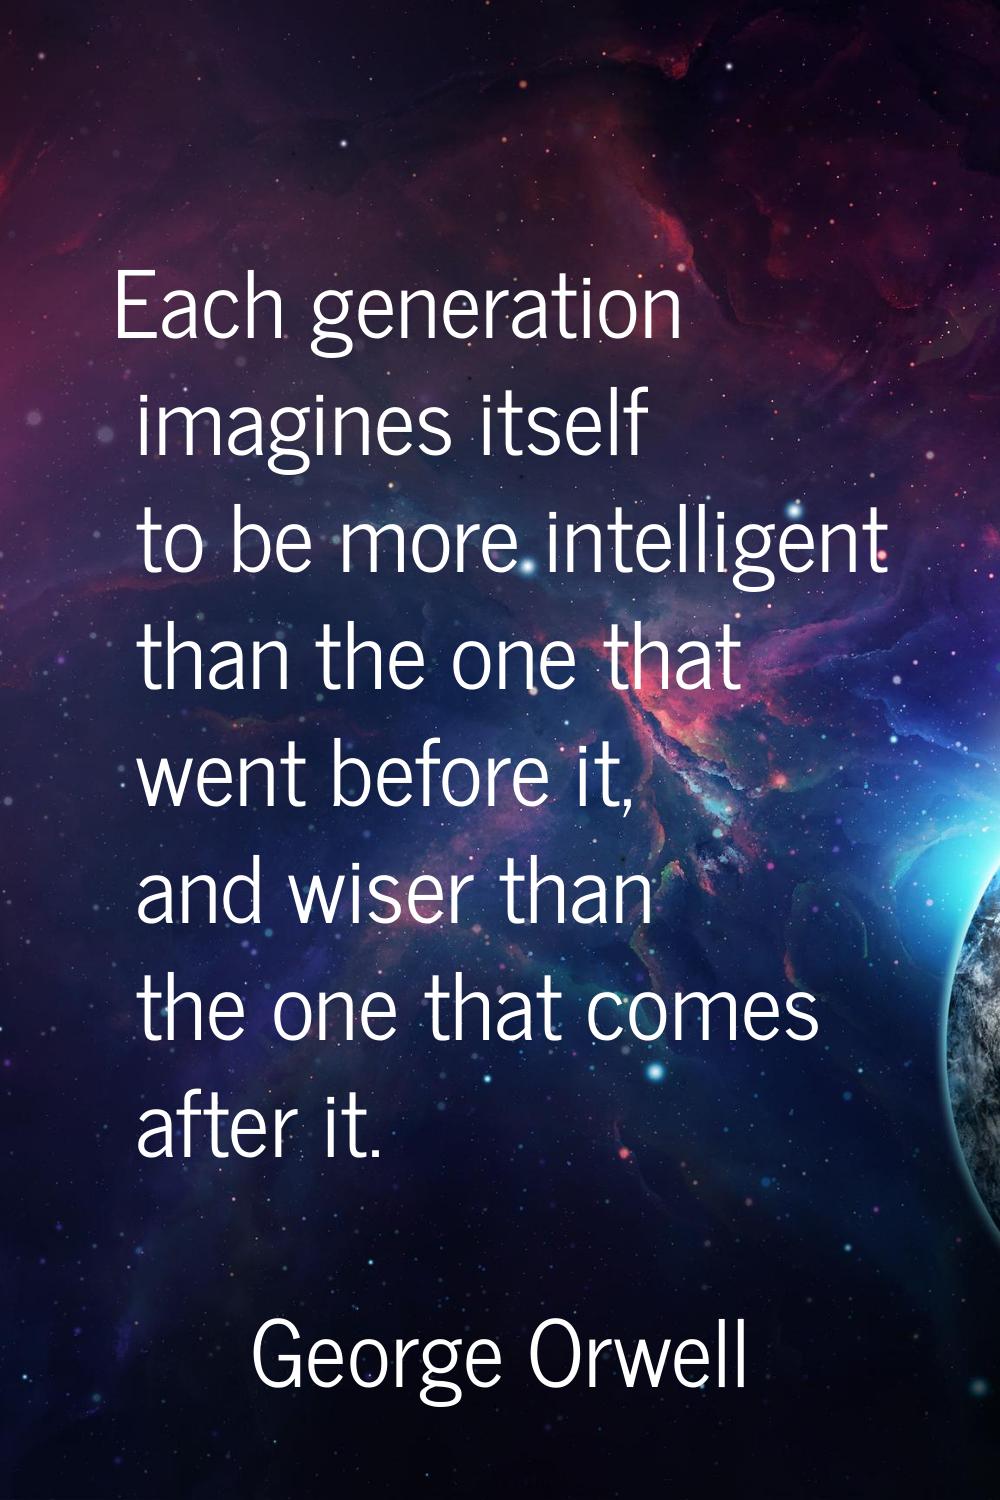 Each generation imagines itself to be more intelligent than the one that went before it, and wiser 